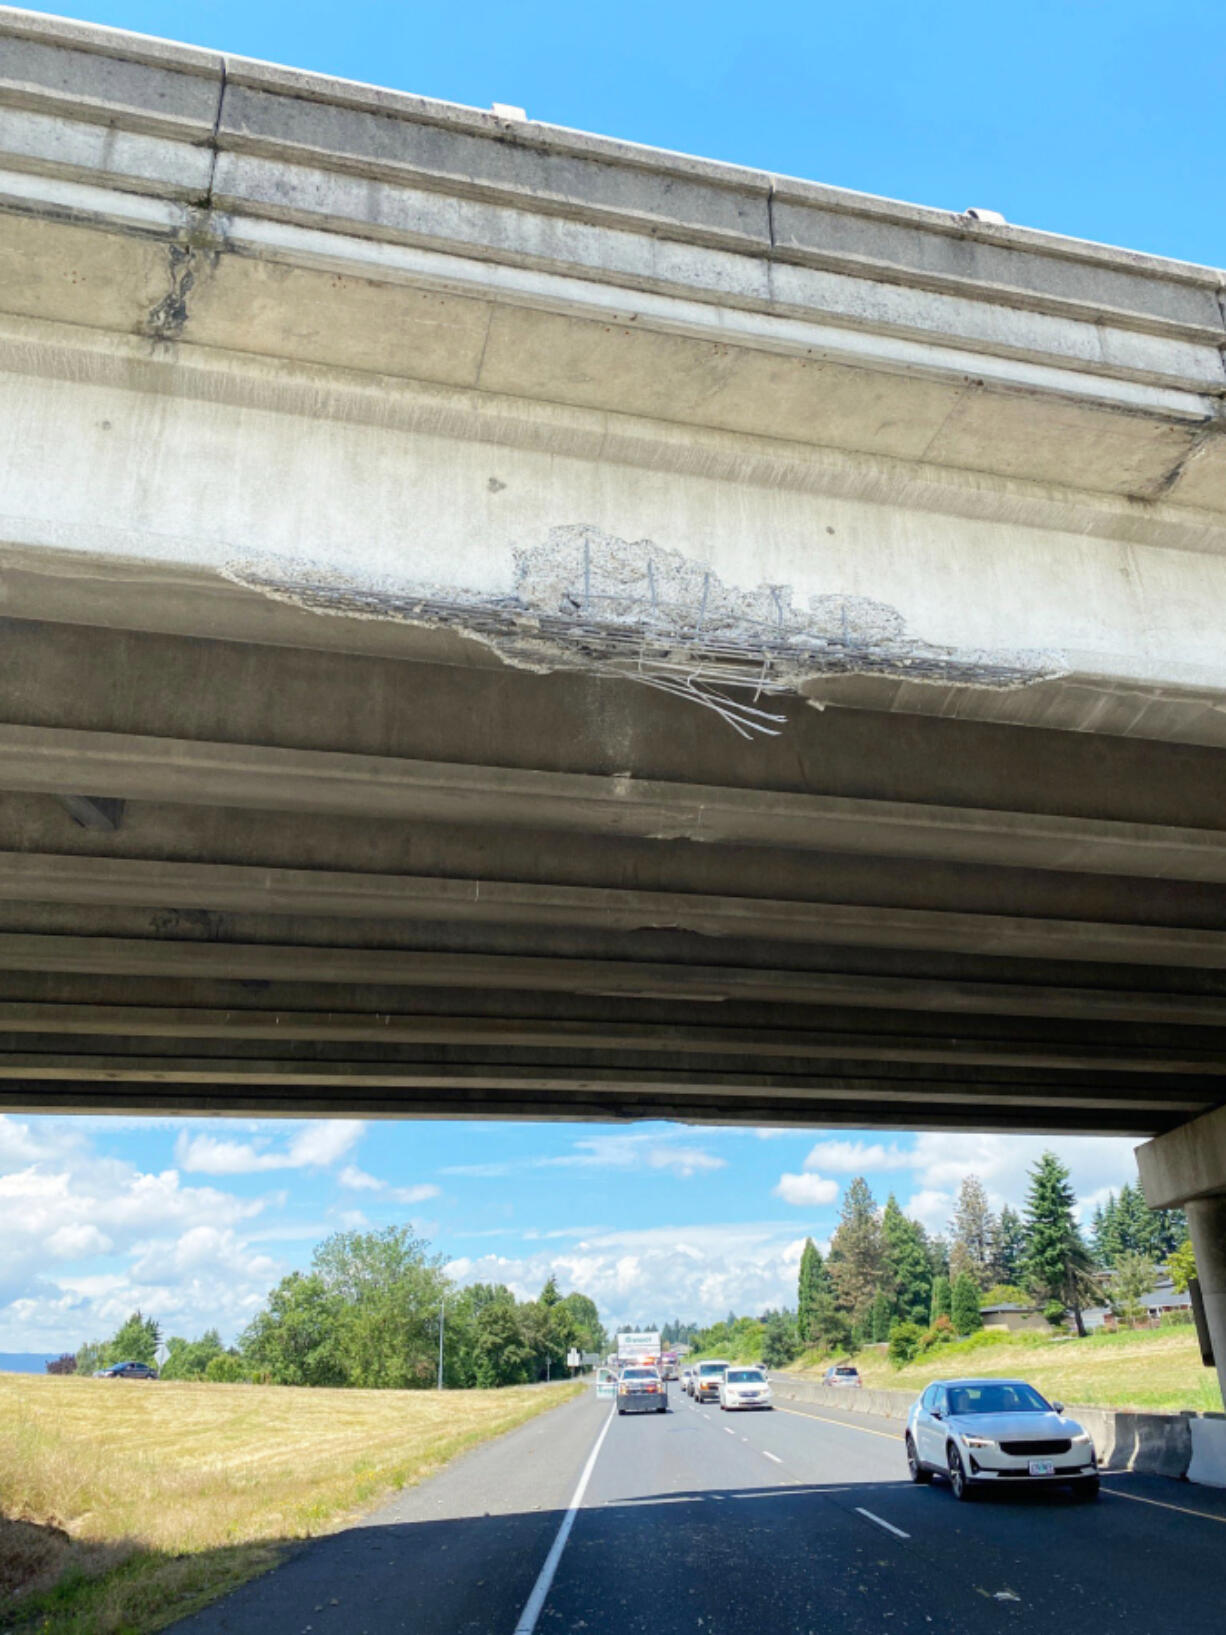 Damage to the Lieser Road overpass on eastbound state Highway 14 after a tractor-trailer struck it Thursday afternoon. Fallen concrete debris damaged five vehicles.